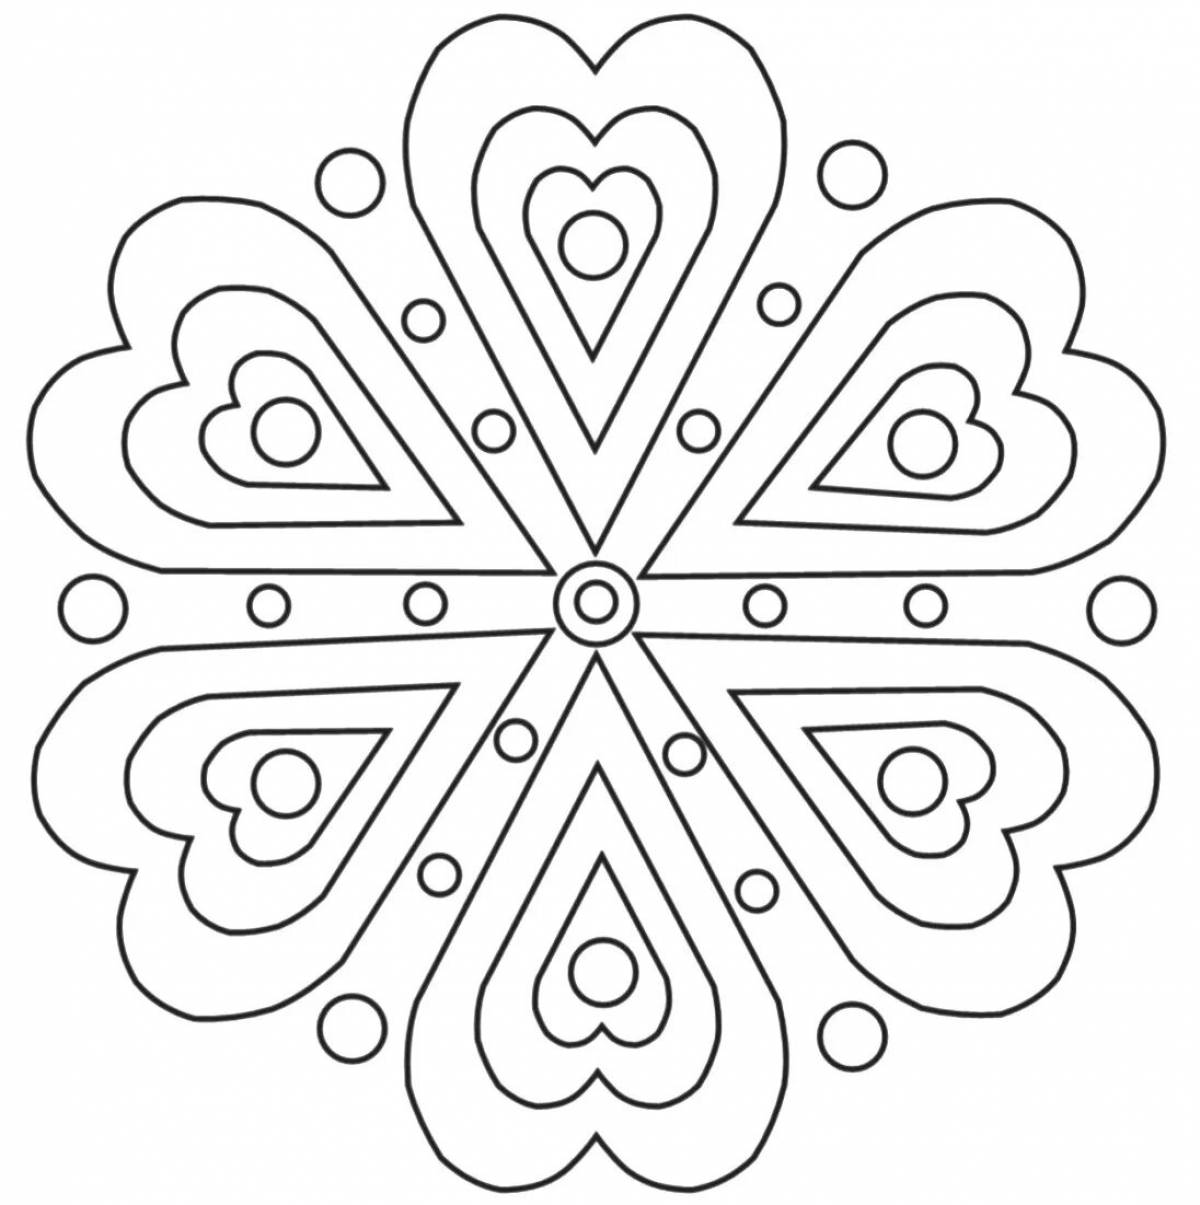 Wonderful patterns and ornaments for coloring for children